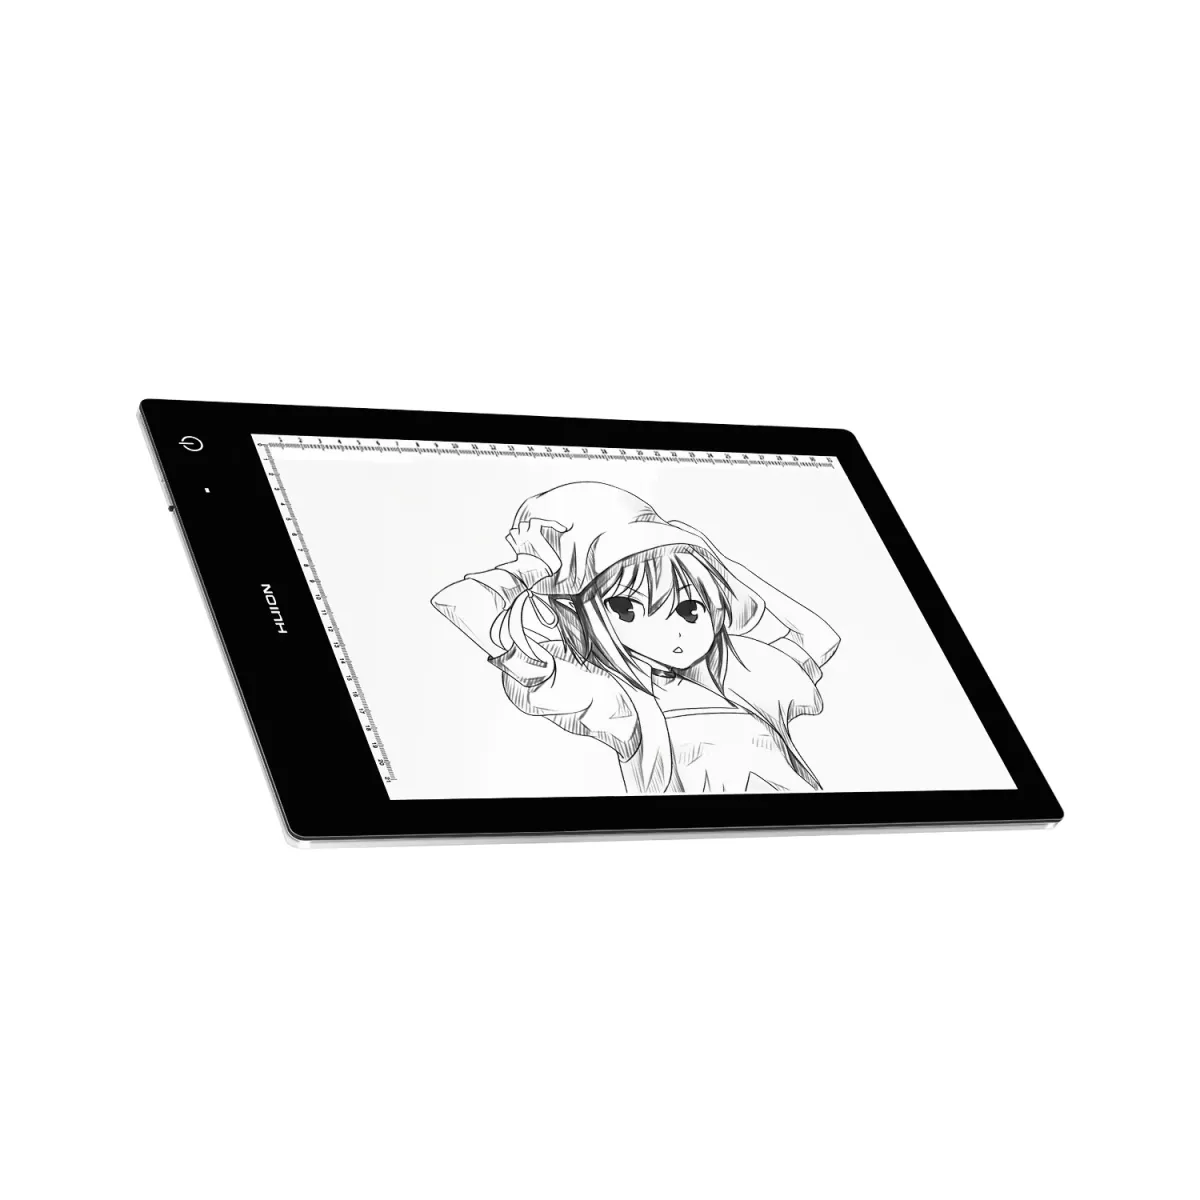 Huion Palm Rejection Artist Glove  Huion Official Store: Drawing Tablets,  Pen Tablets, Pen Display, Led Light Pad